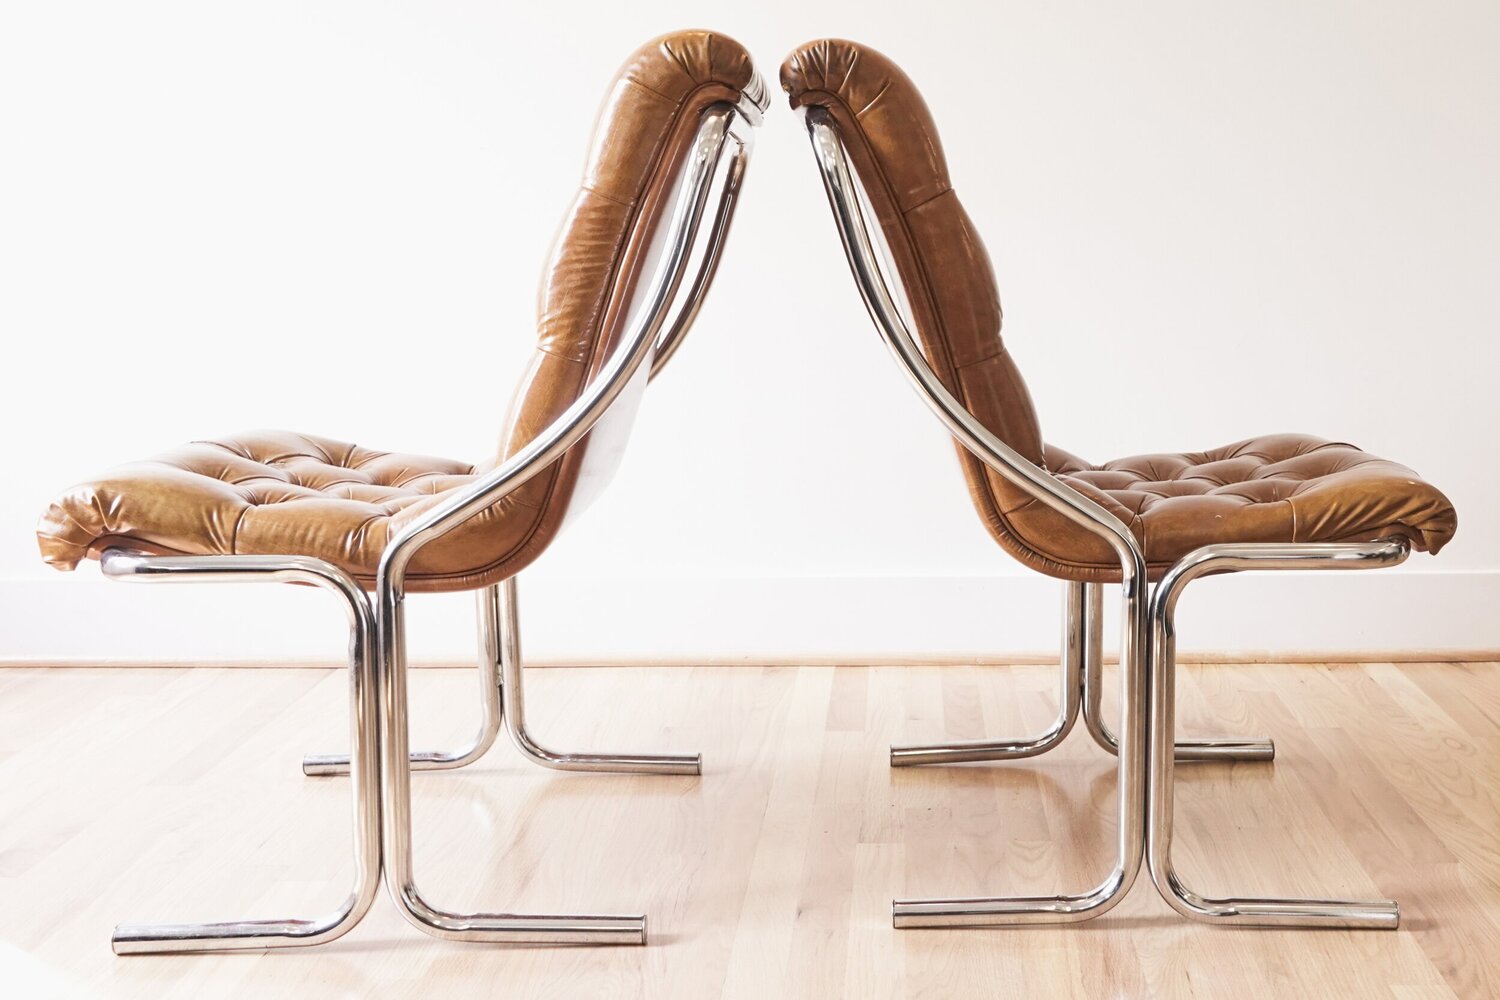 Vinyl and Chromium chairs by Daystrom